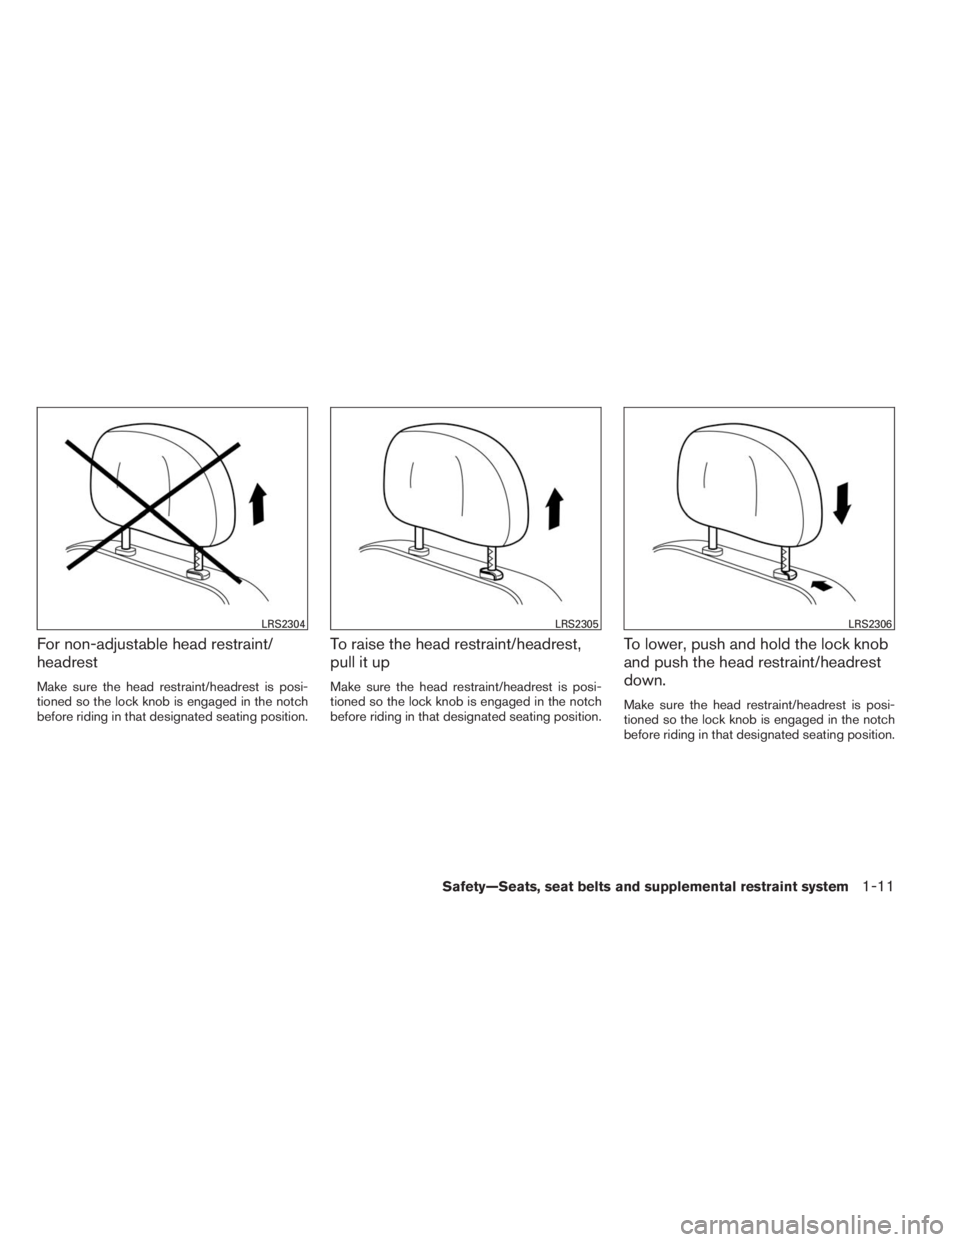 INFINITI QX60 2014 User Guide For non-adjustable head restraint/
headrest
Make sure the head restraint/headrest is posi-
tioned so the lock knob is engaged in the notch
before riding in that designated seating position.
To raise t